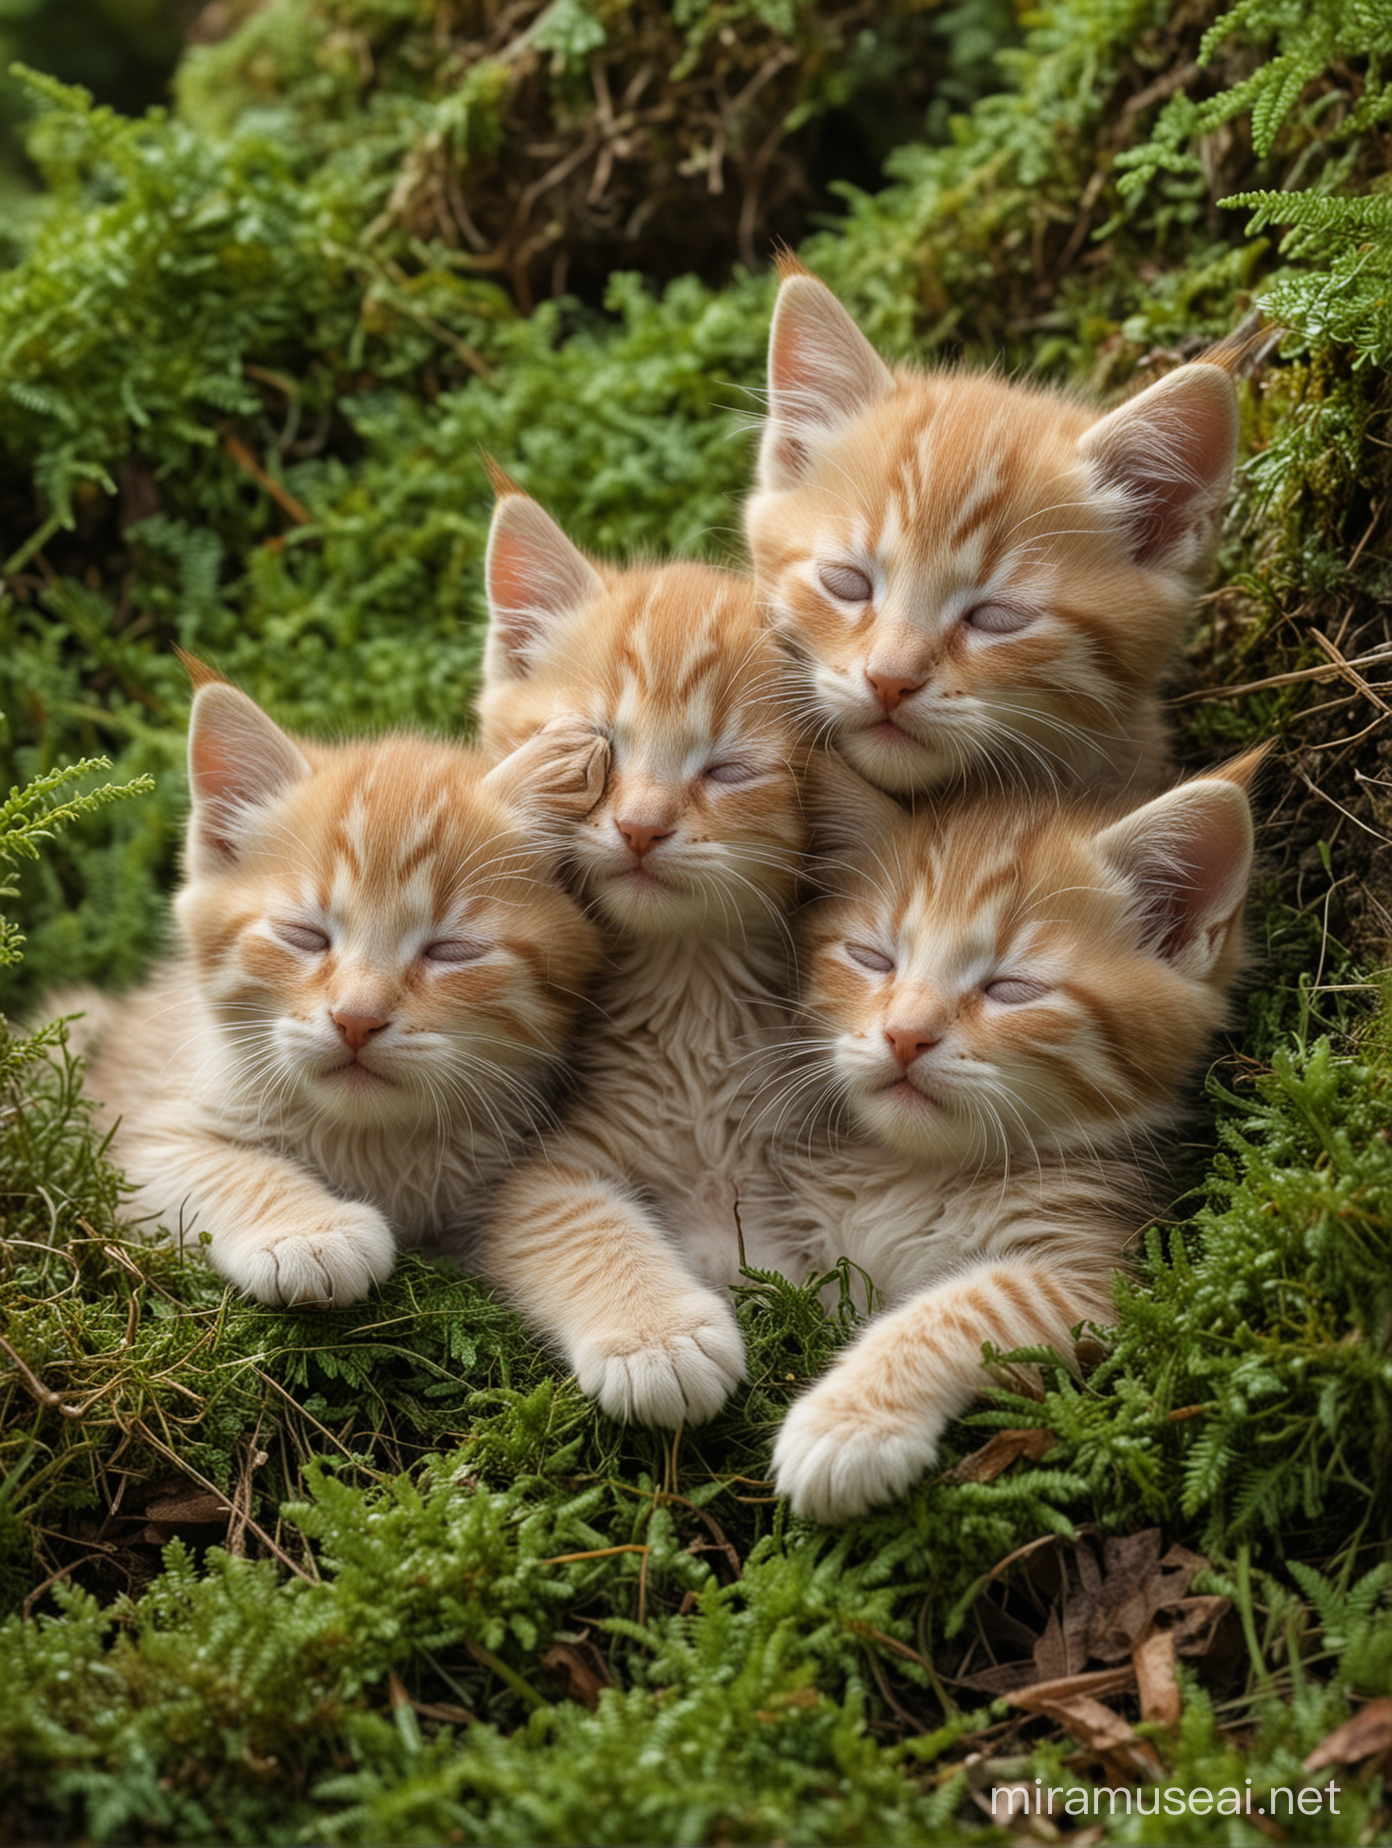 kittens lie tired and sleepy in the forest moss
